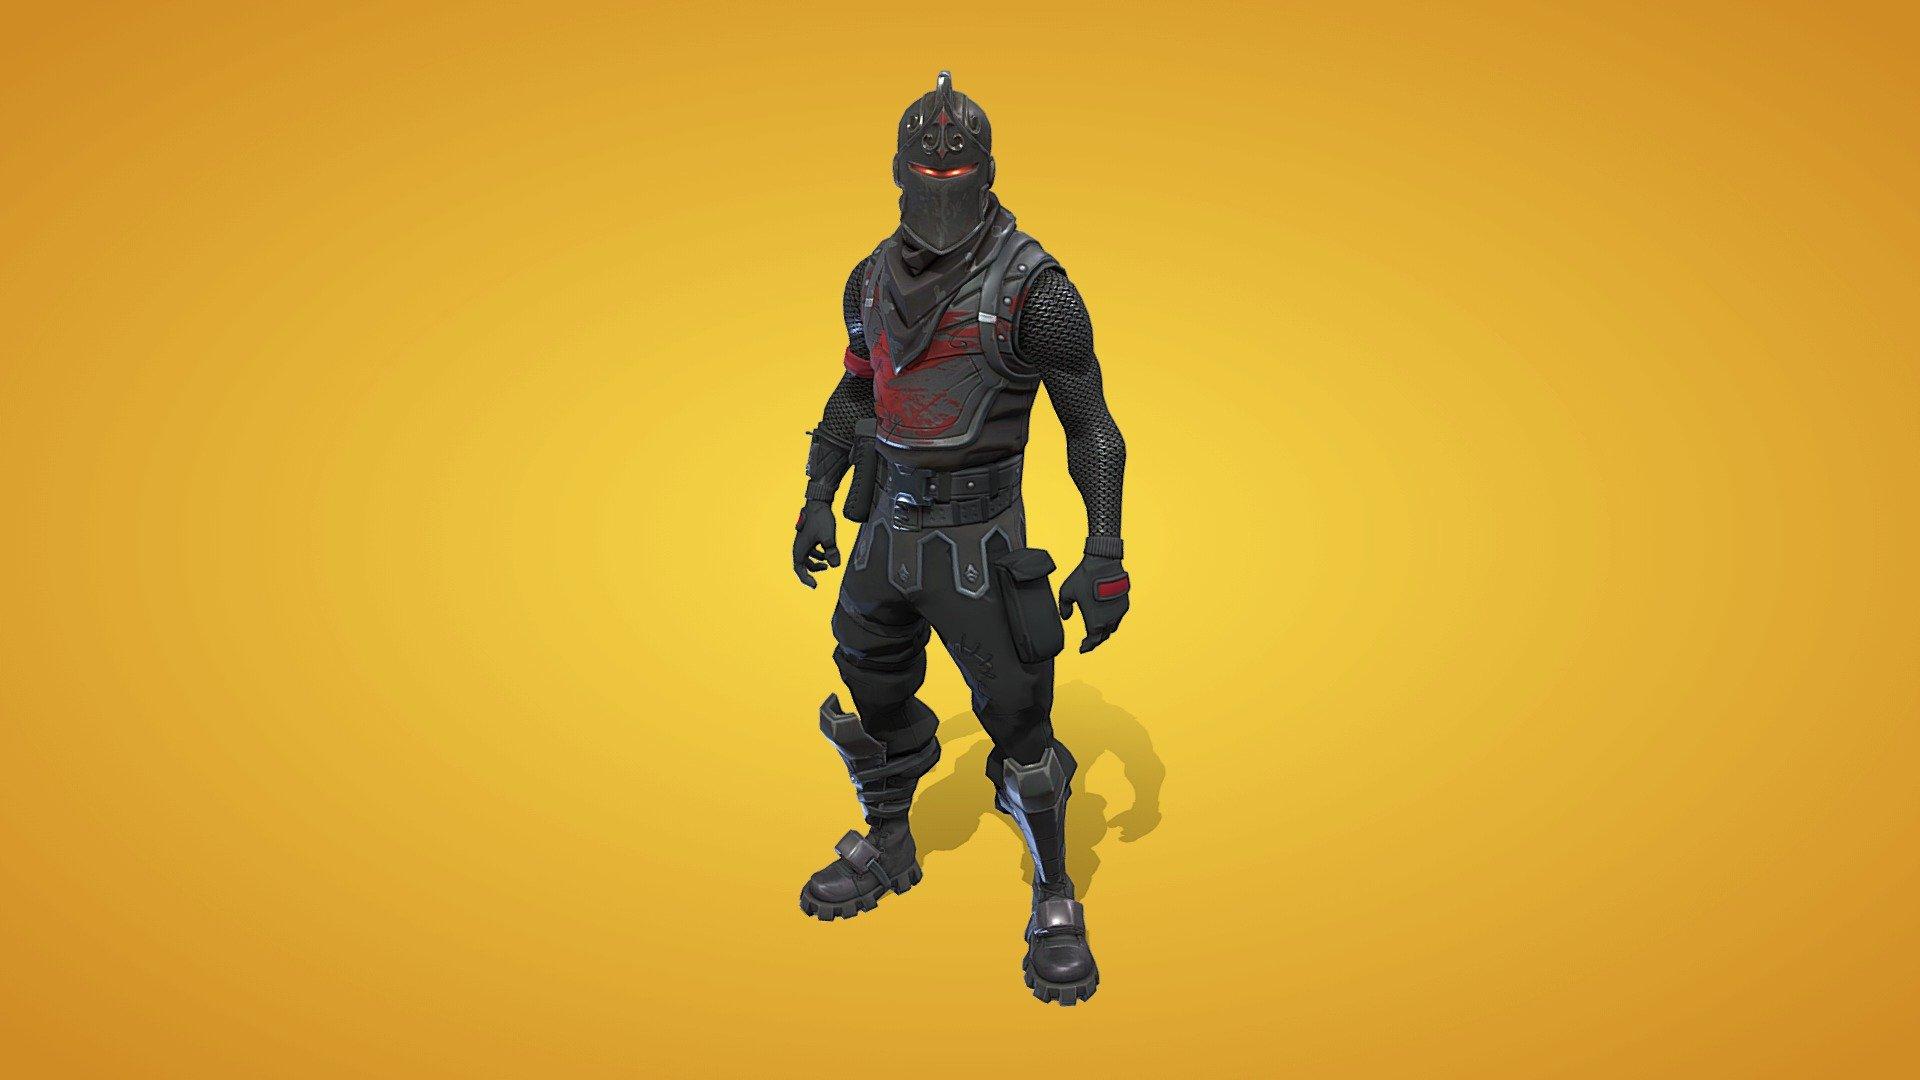 Black Knight Outfit model